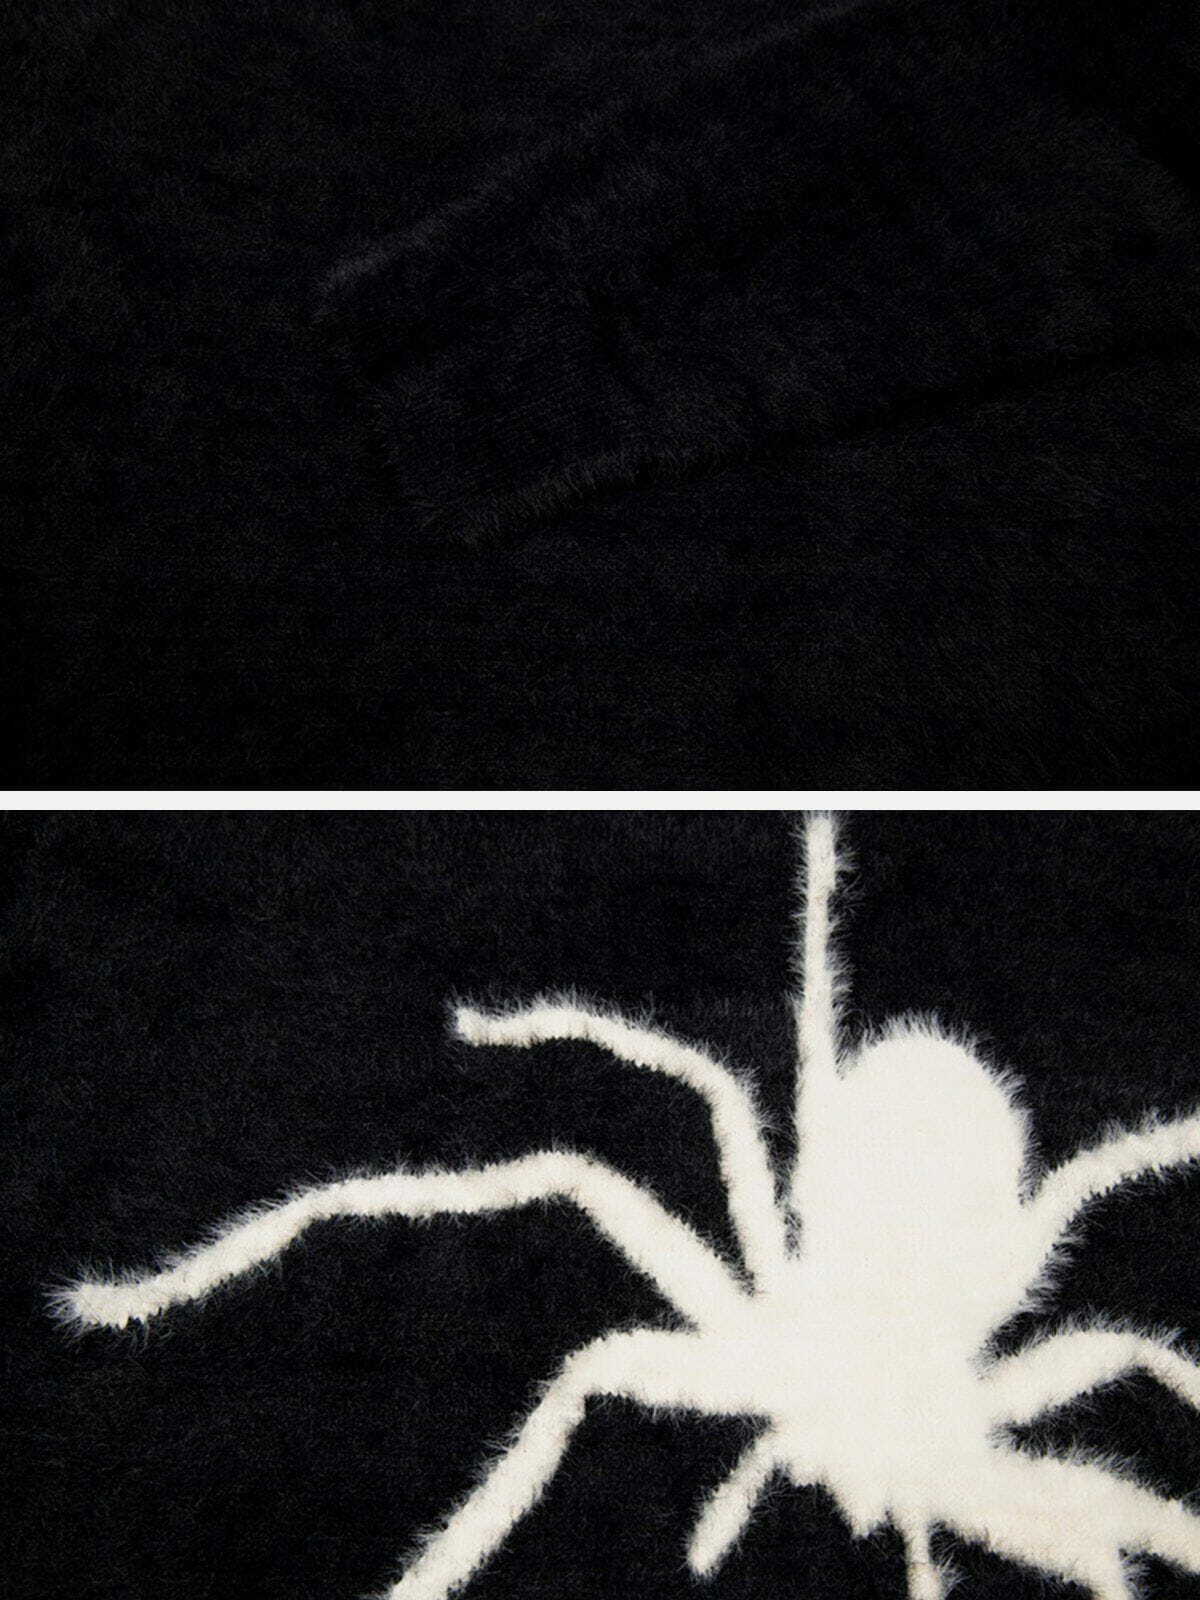 spider knit mohair sweater edgy & vibrant streetwear 4329